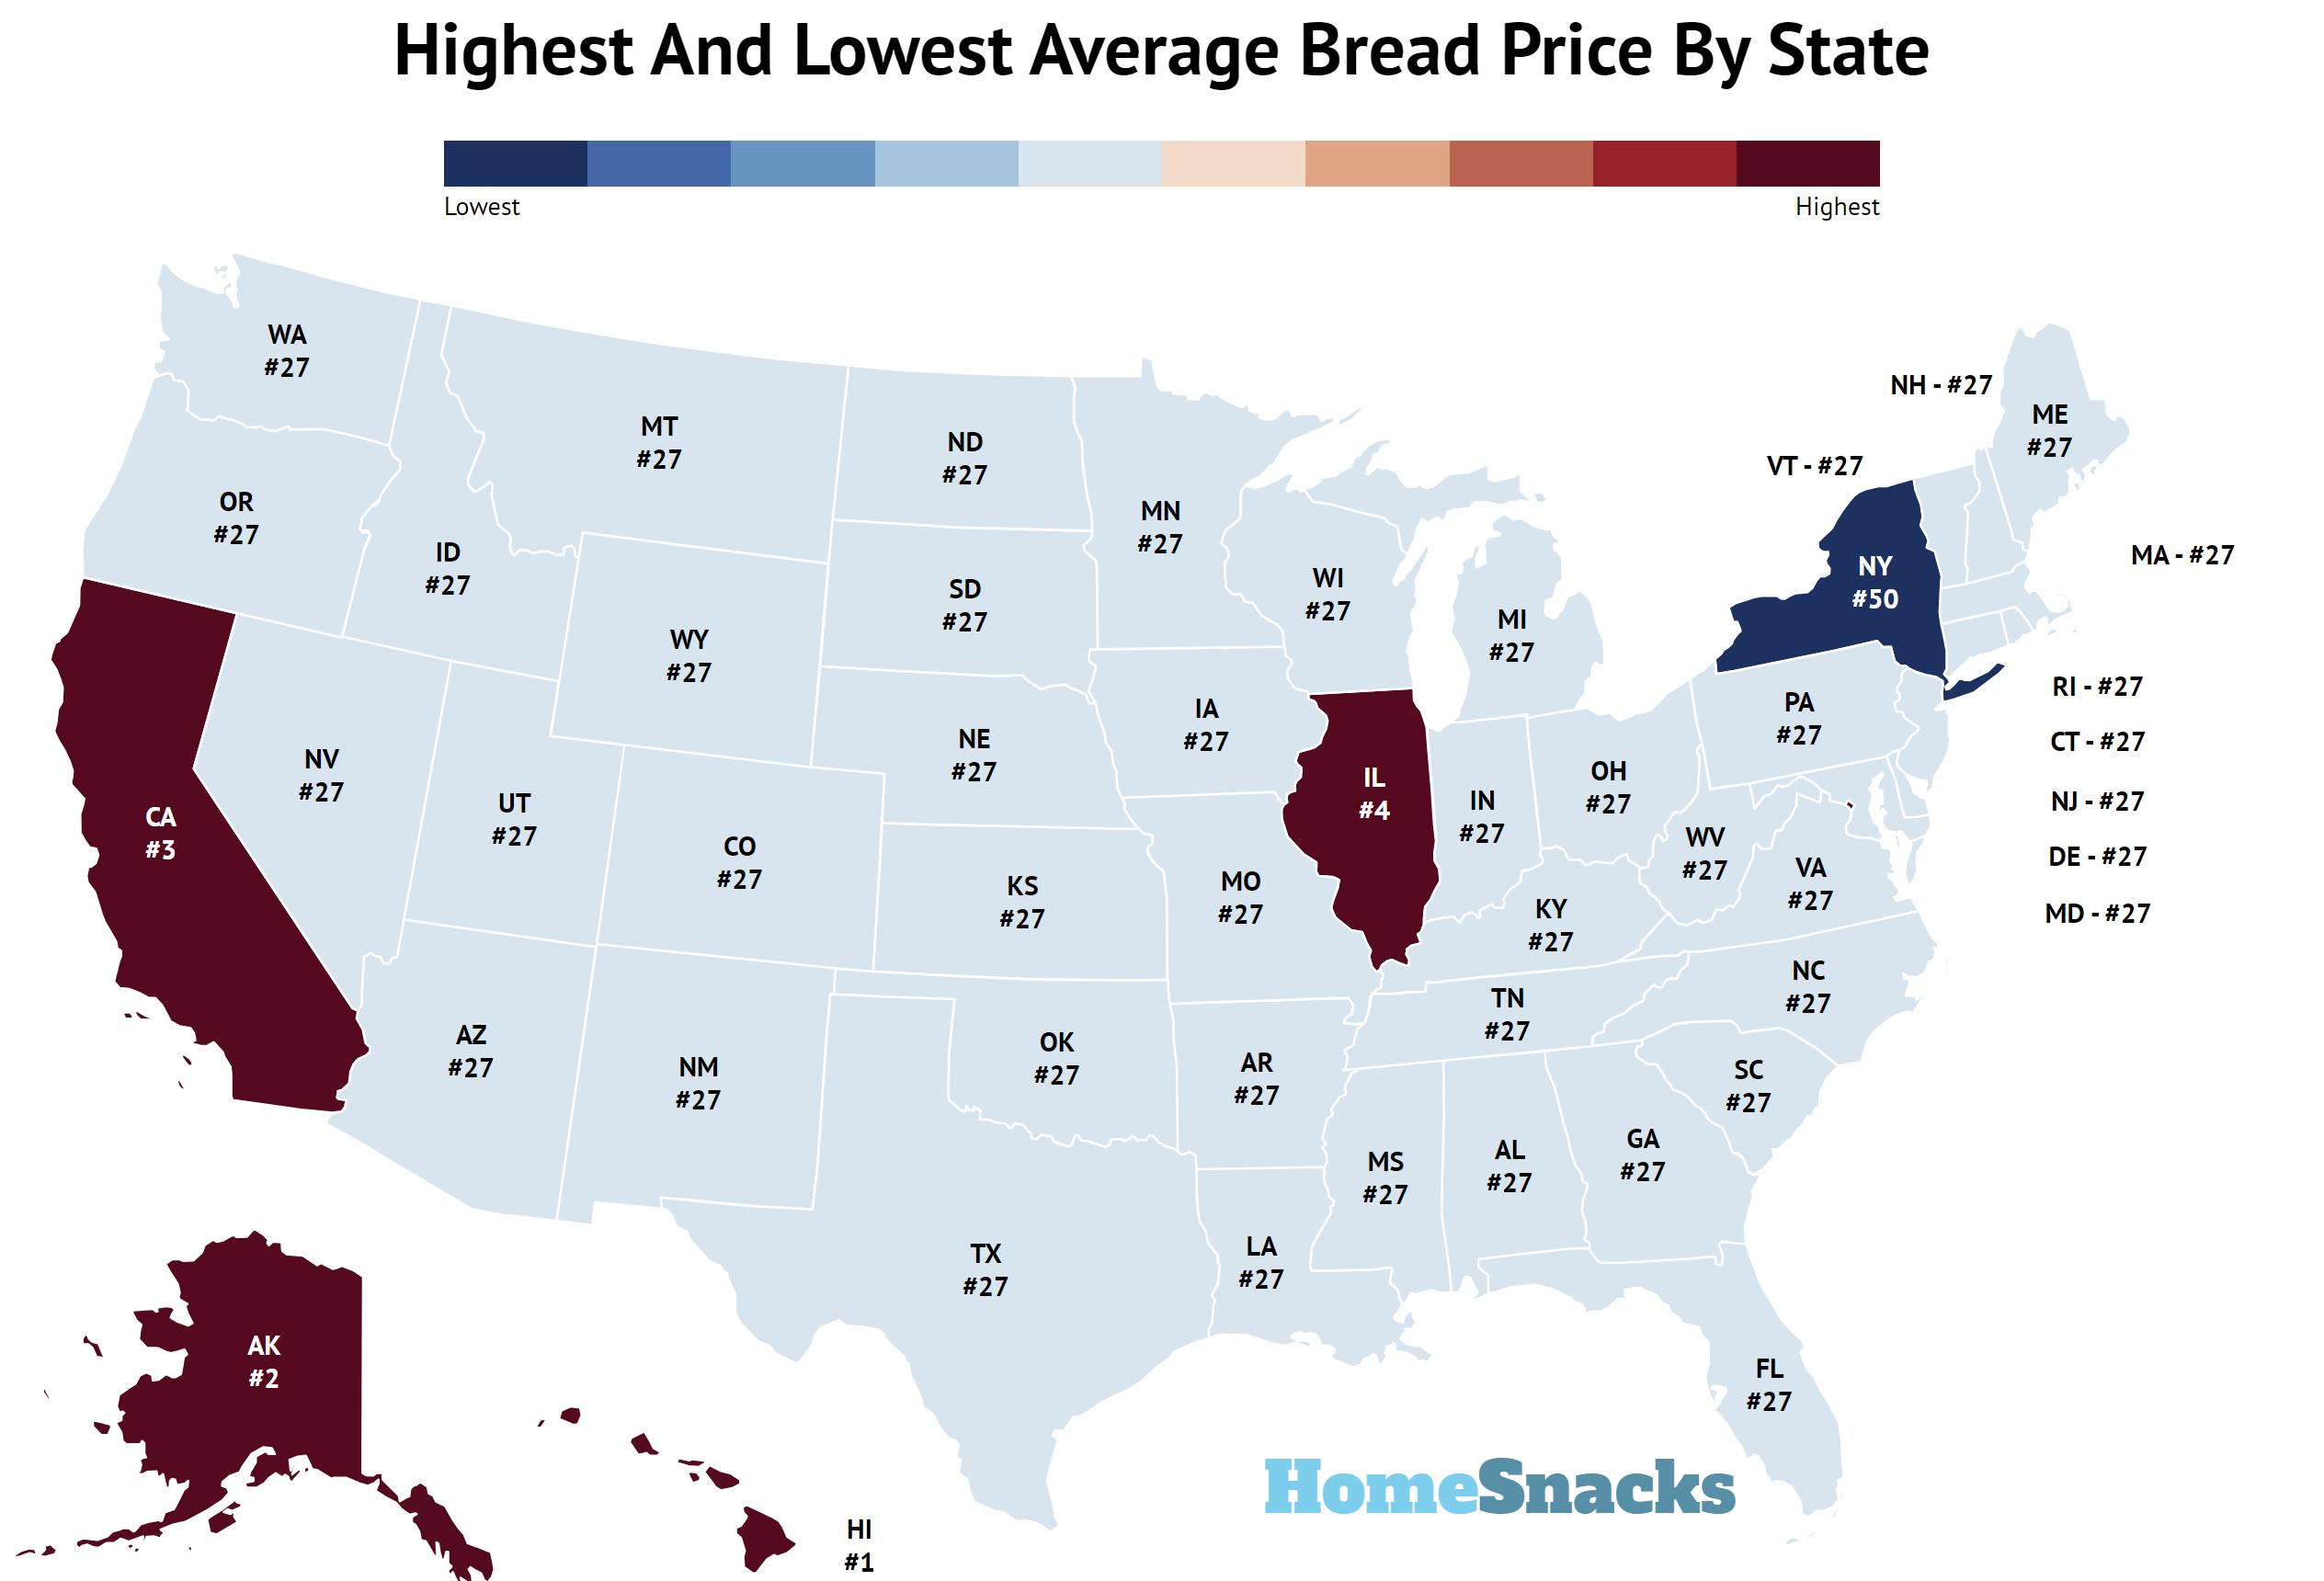 Highest And Lowest Average Bread Price By State